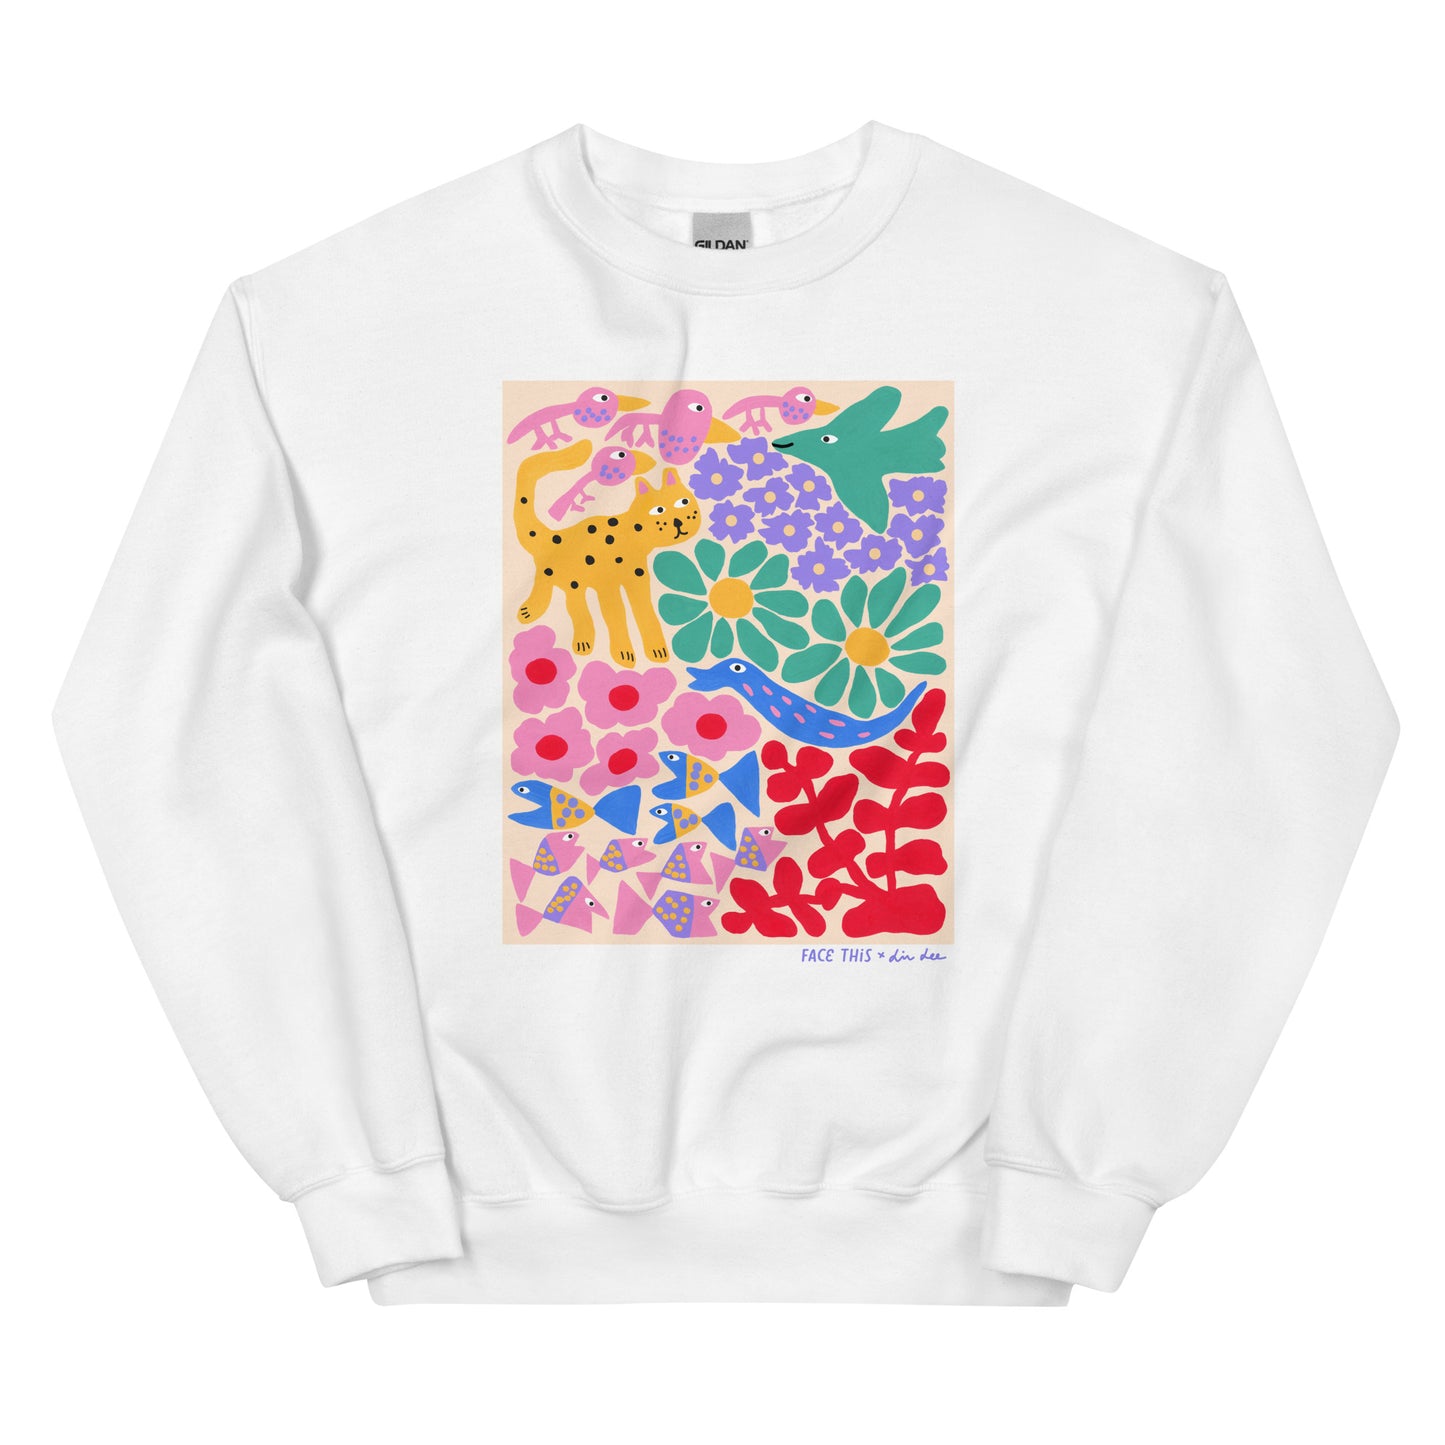 Liv Lee x Face This sweater